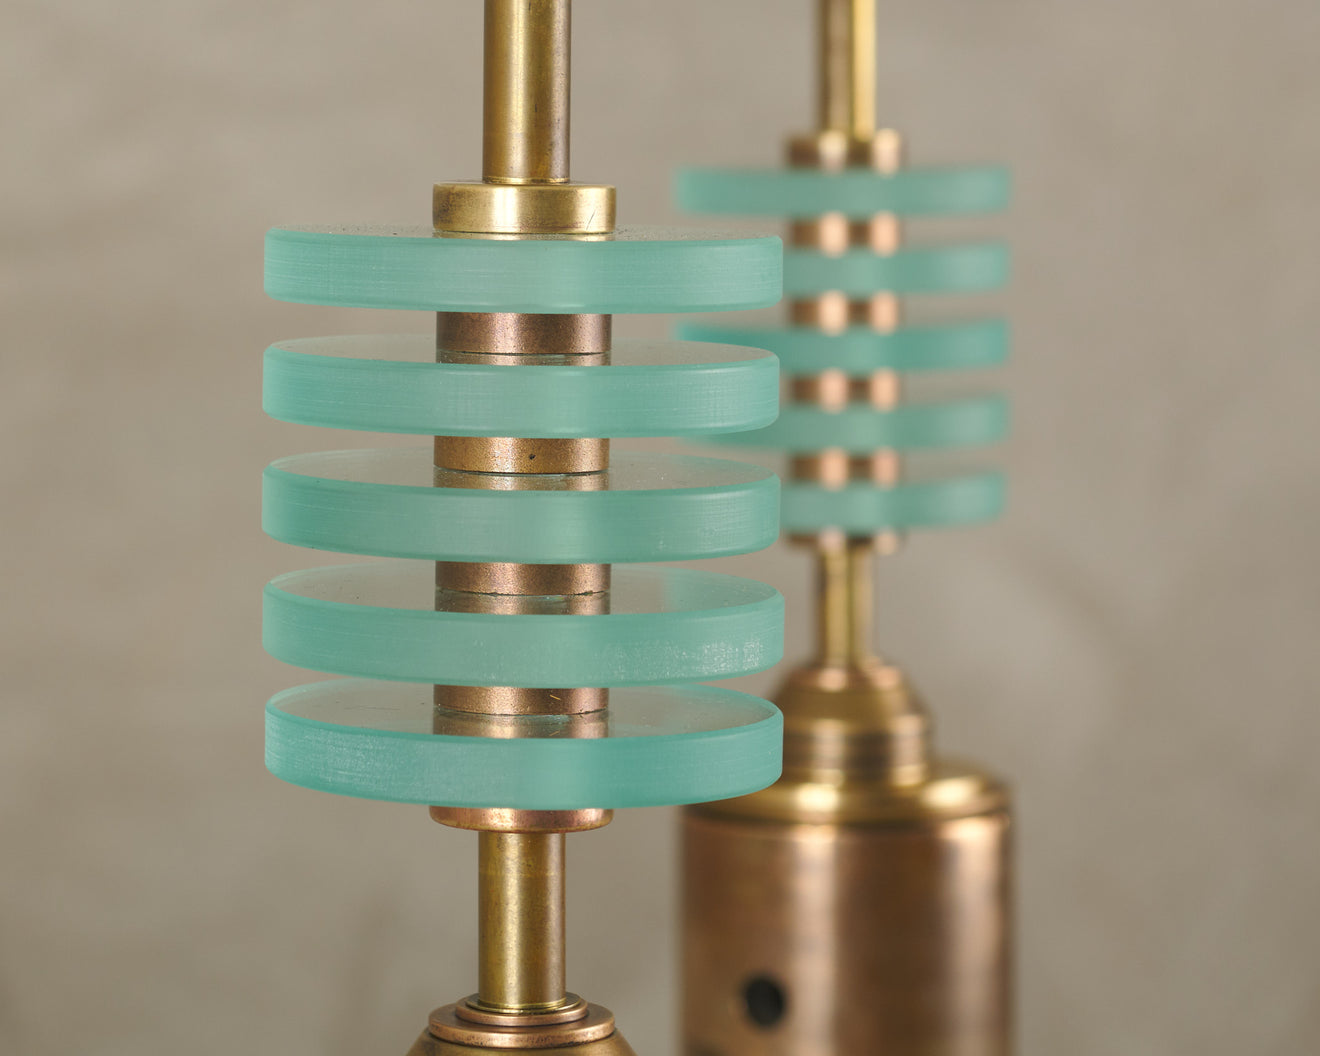 PAIR OF PUMP LAMPS BY GIANNI VALLINO